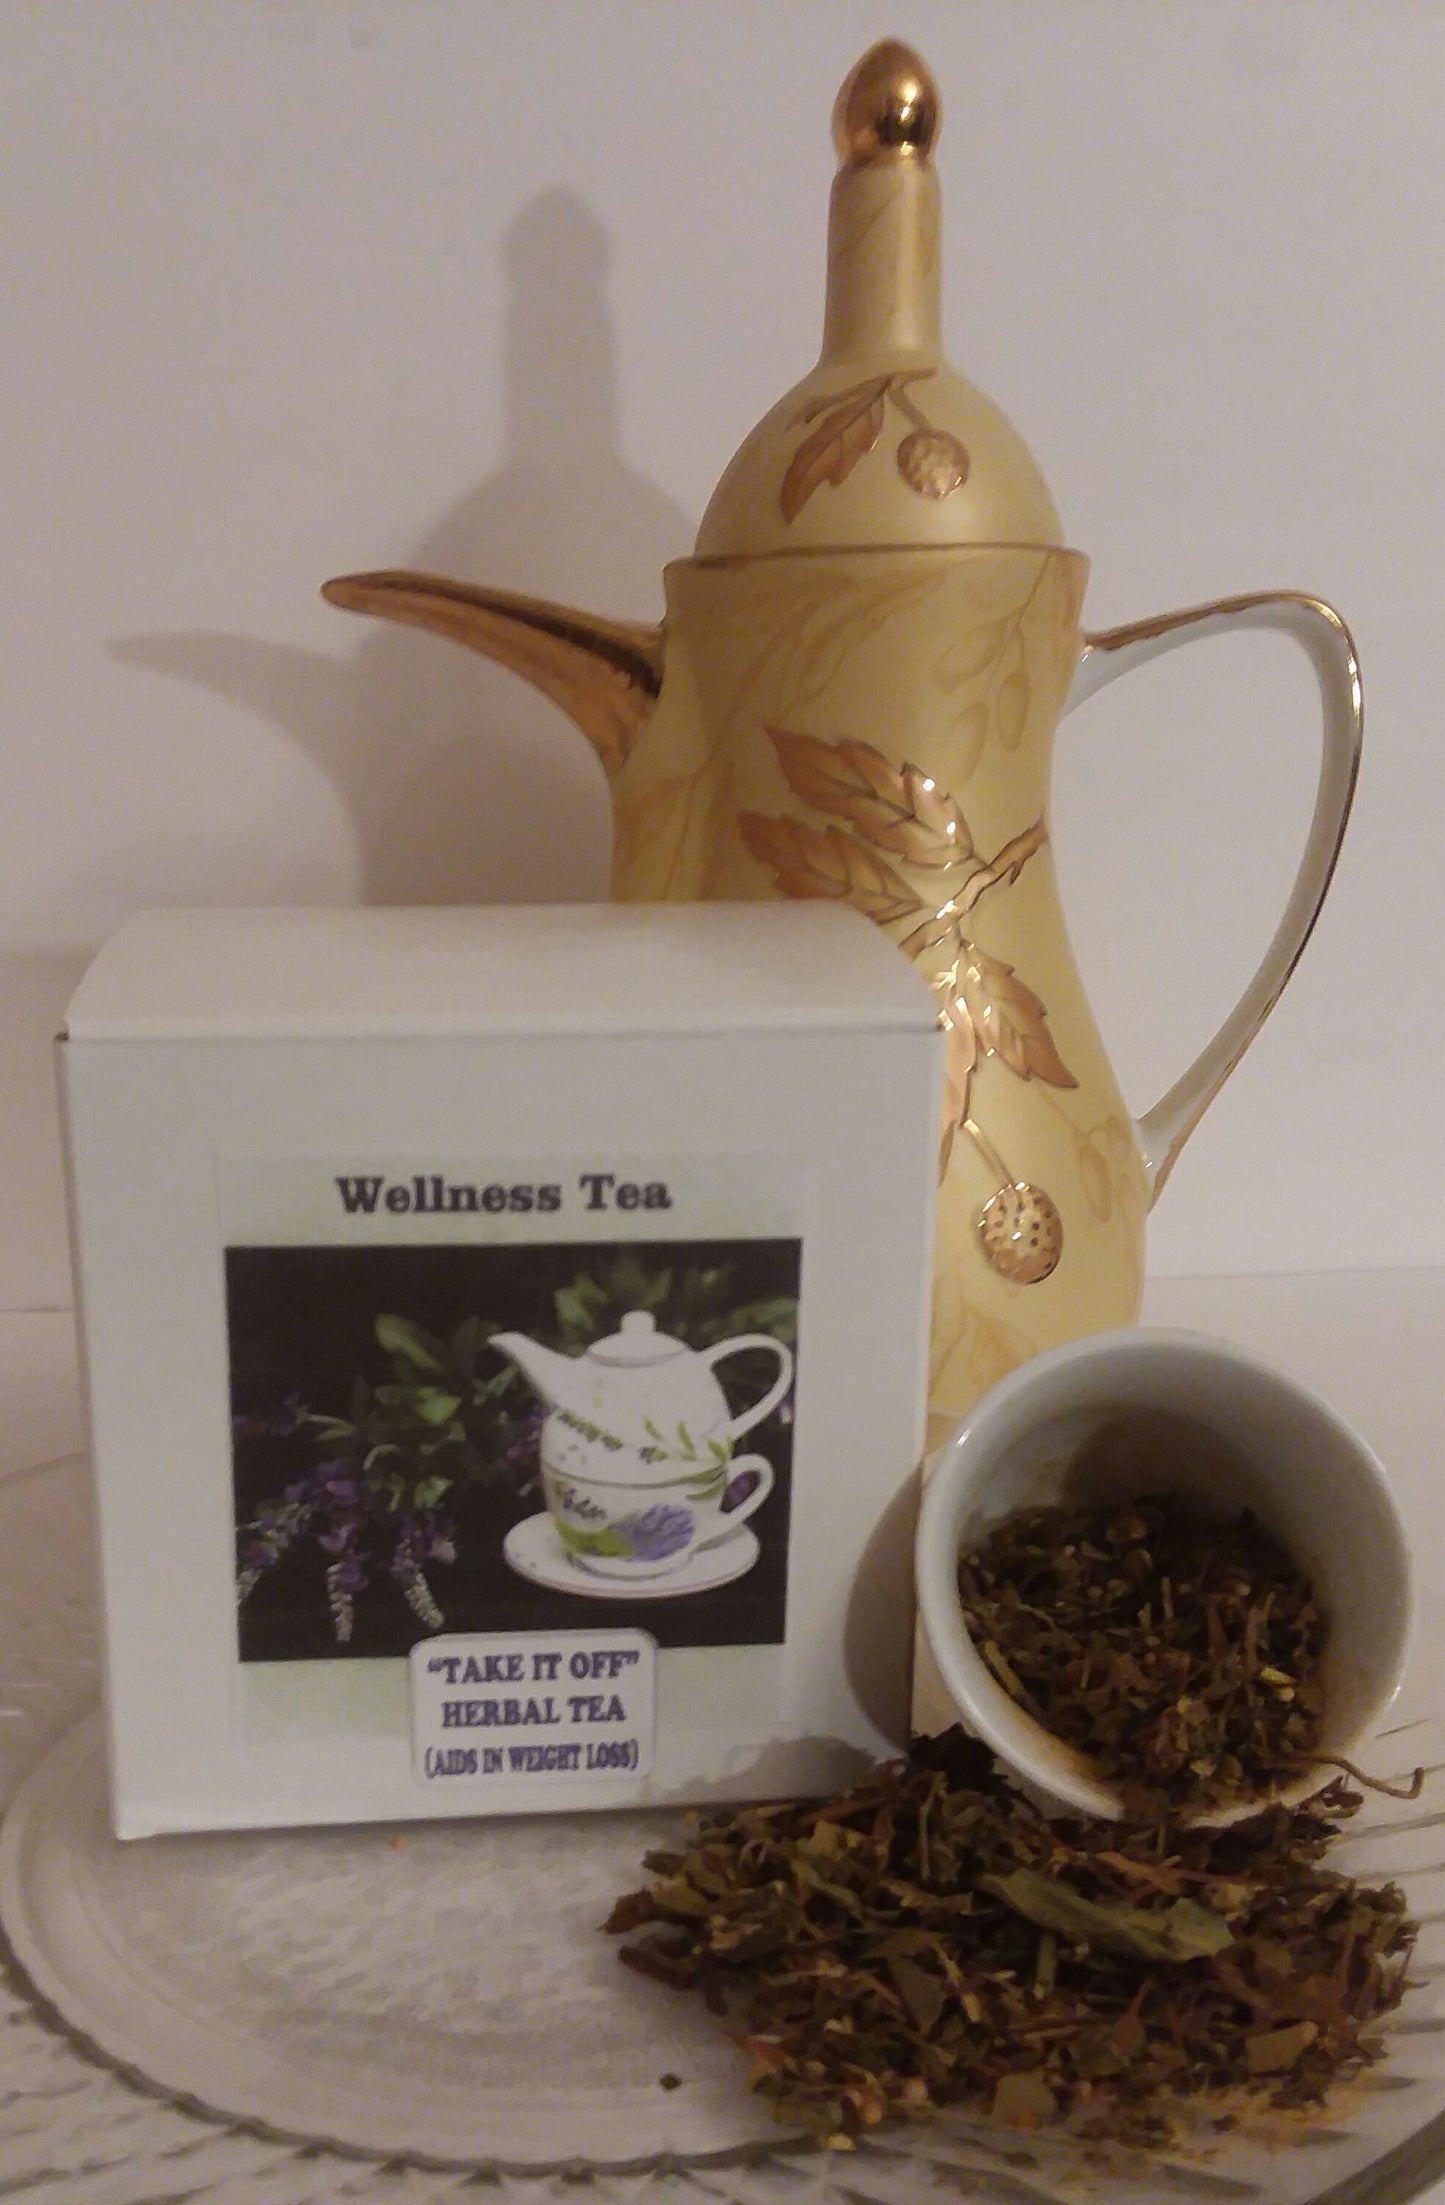 Take It Off Tea (Aids In Weight Loss) 3 oz